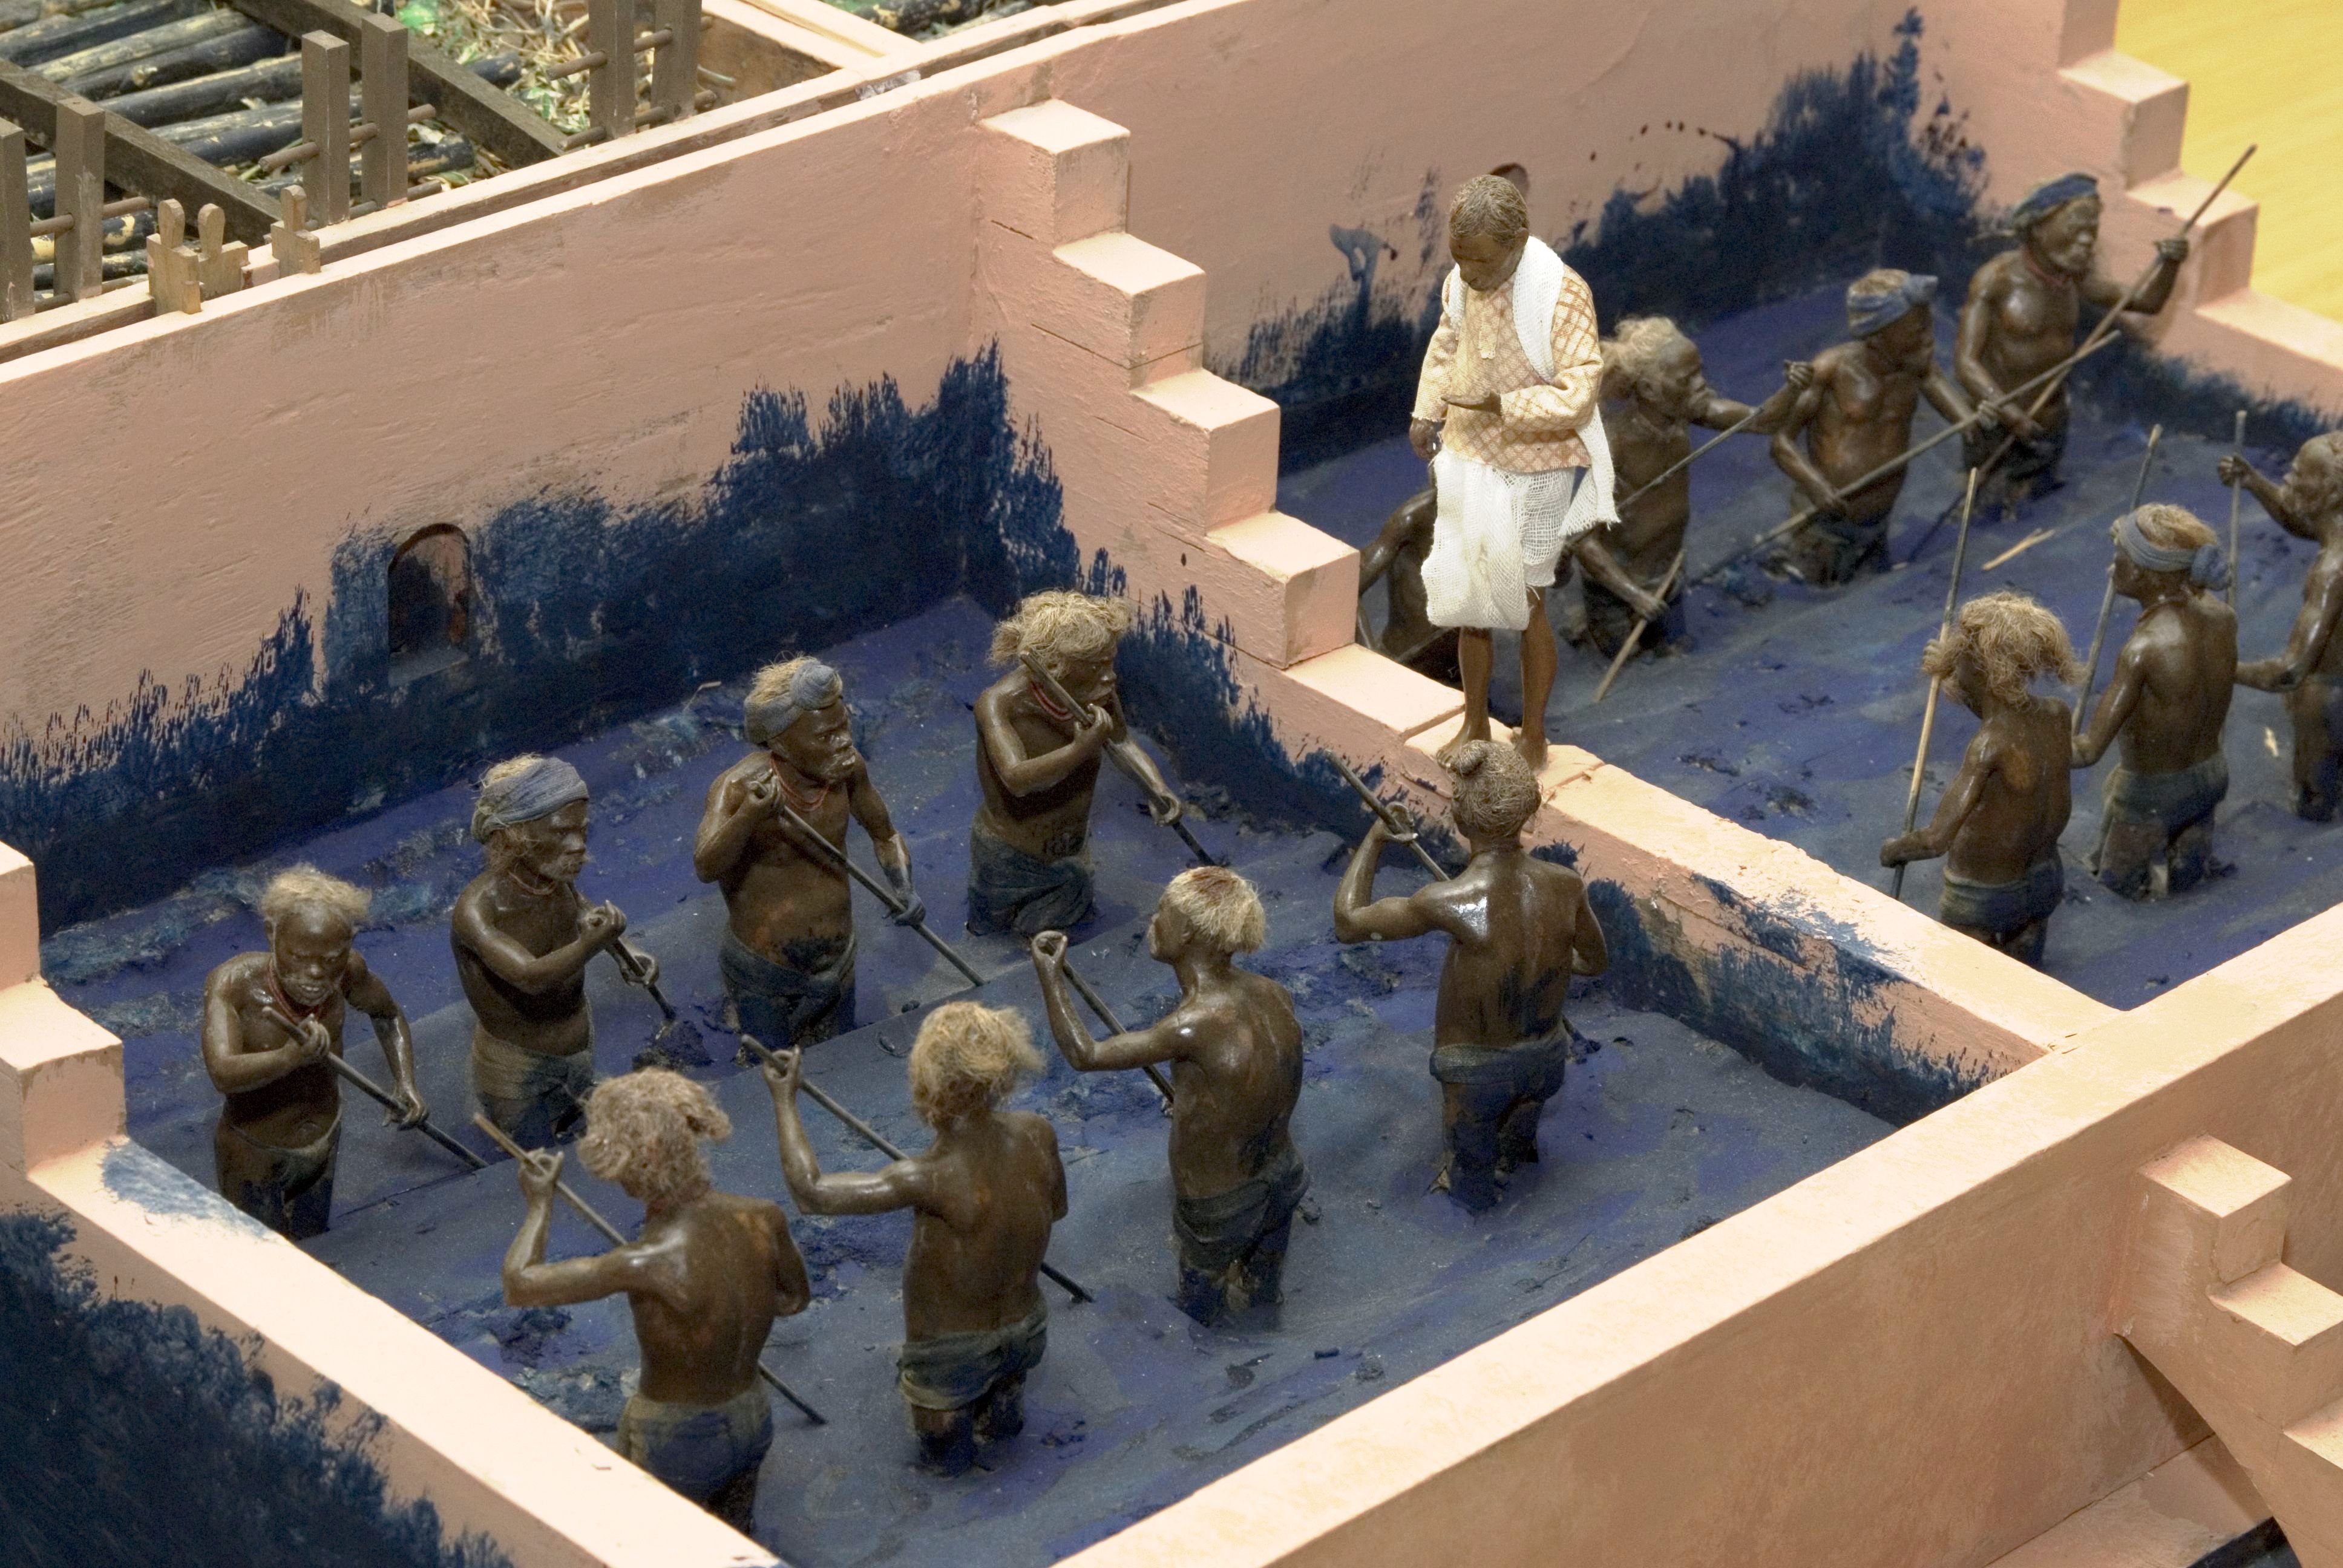 Figurines of workers waist-deep in blue dye, beating the dye with paddles.